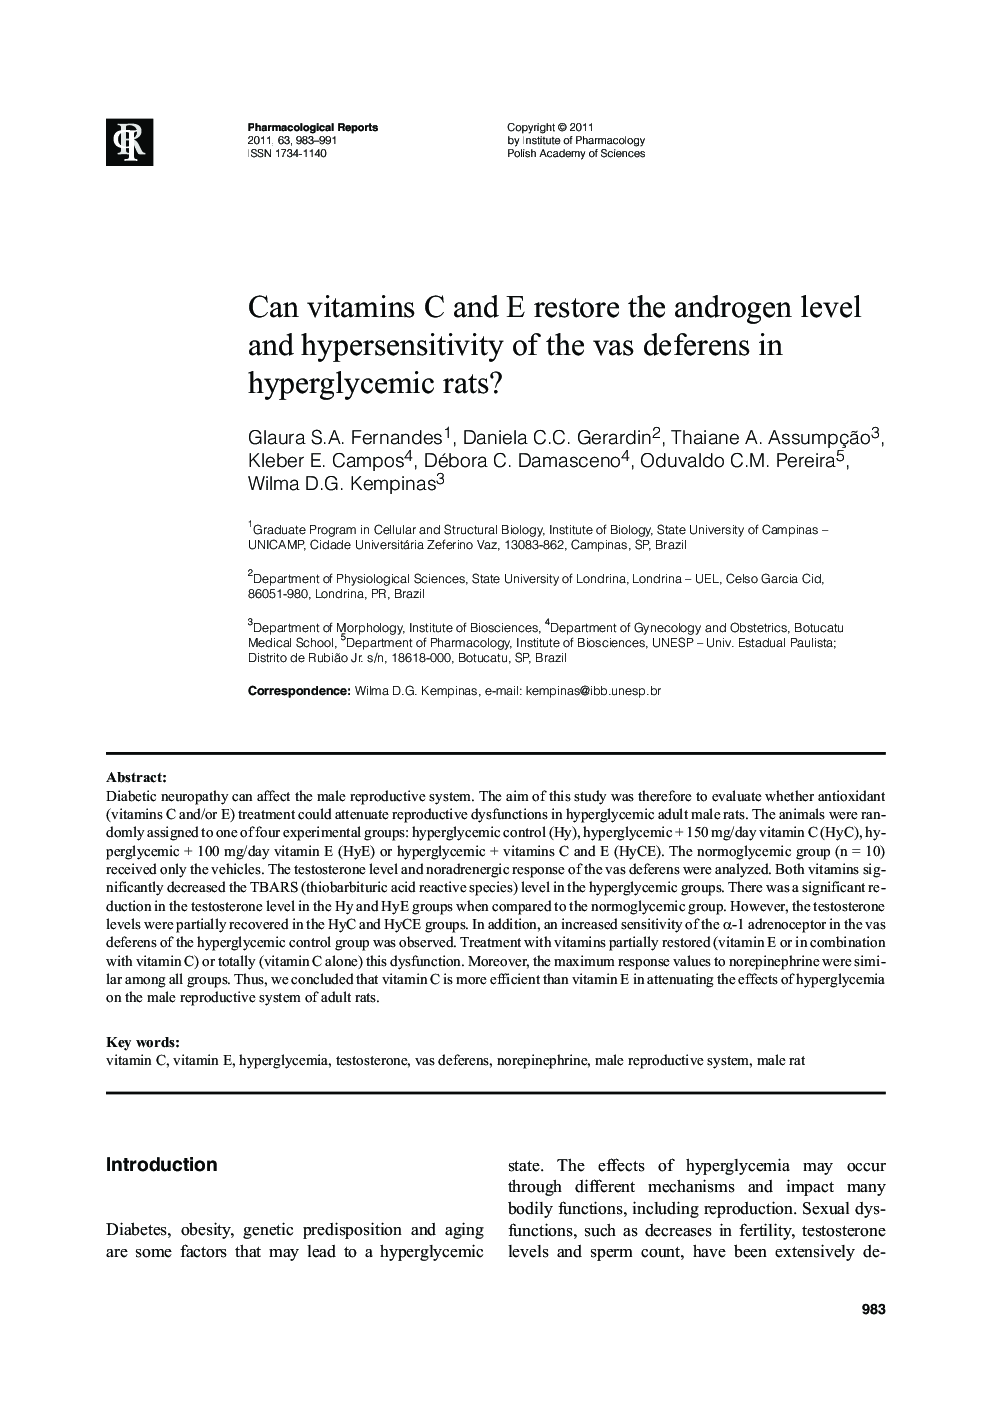 Can vitamins C and E restore the androgen level and hypersensitivity of the vas deferens in hyperglycemic rats?